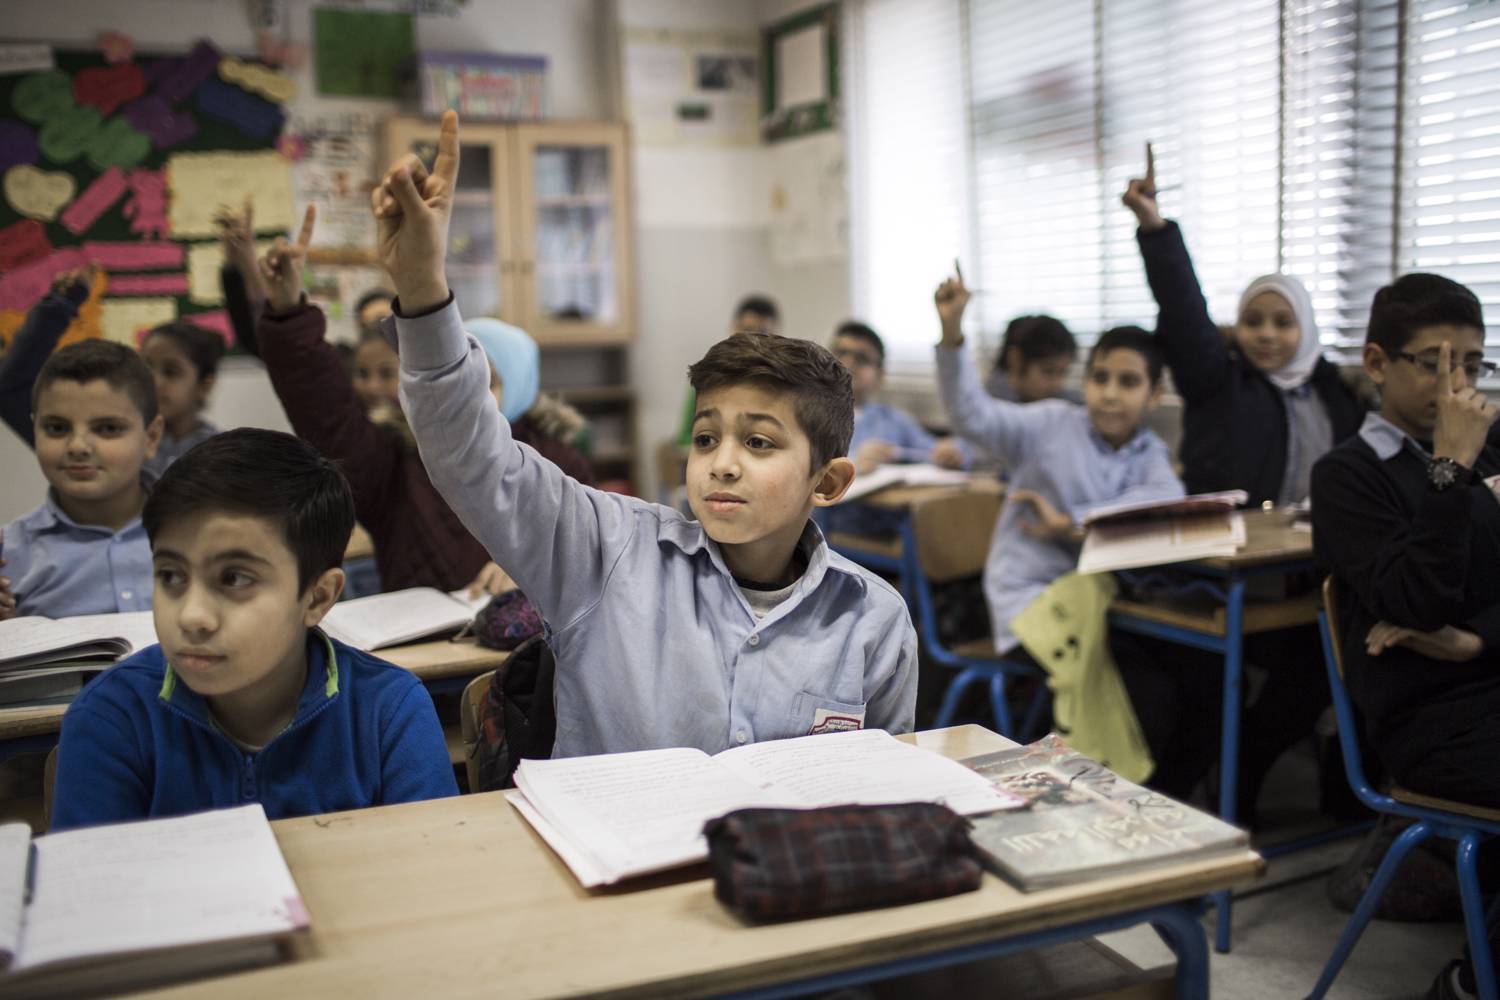 Syrian and Lebanese students sit together in classes at the Mohammed Shamel mixed Elementary public school in Tariq el Jdideh, Beirut, Lebanon. Photo: Adam Patterson/Panos/DFID via Flickr